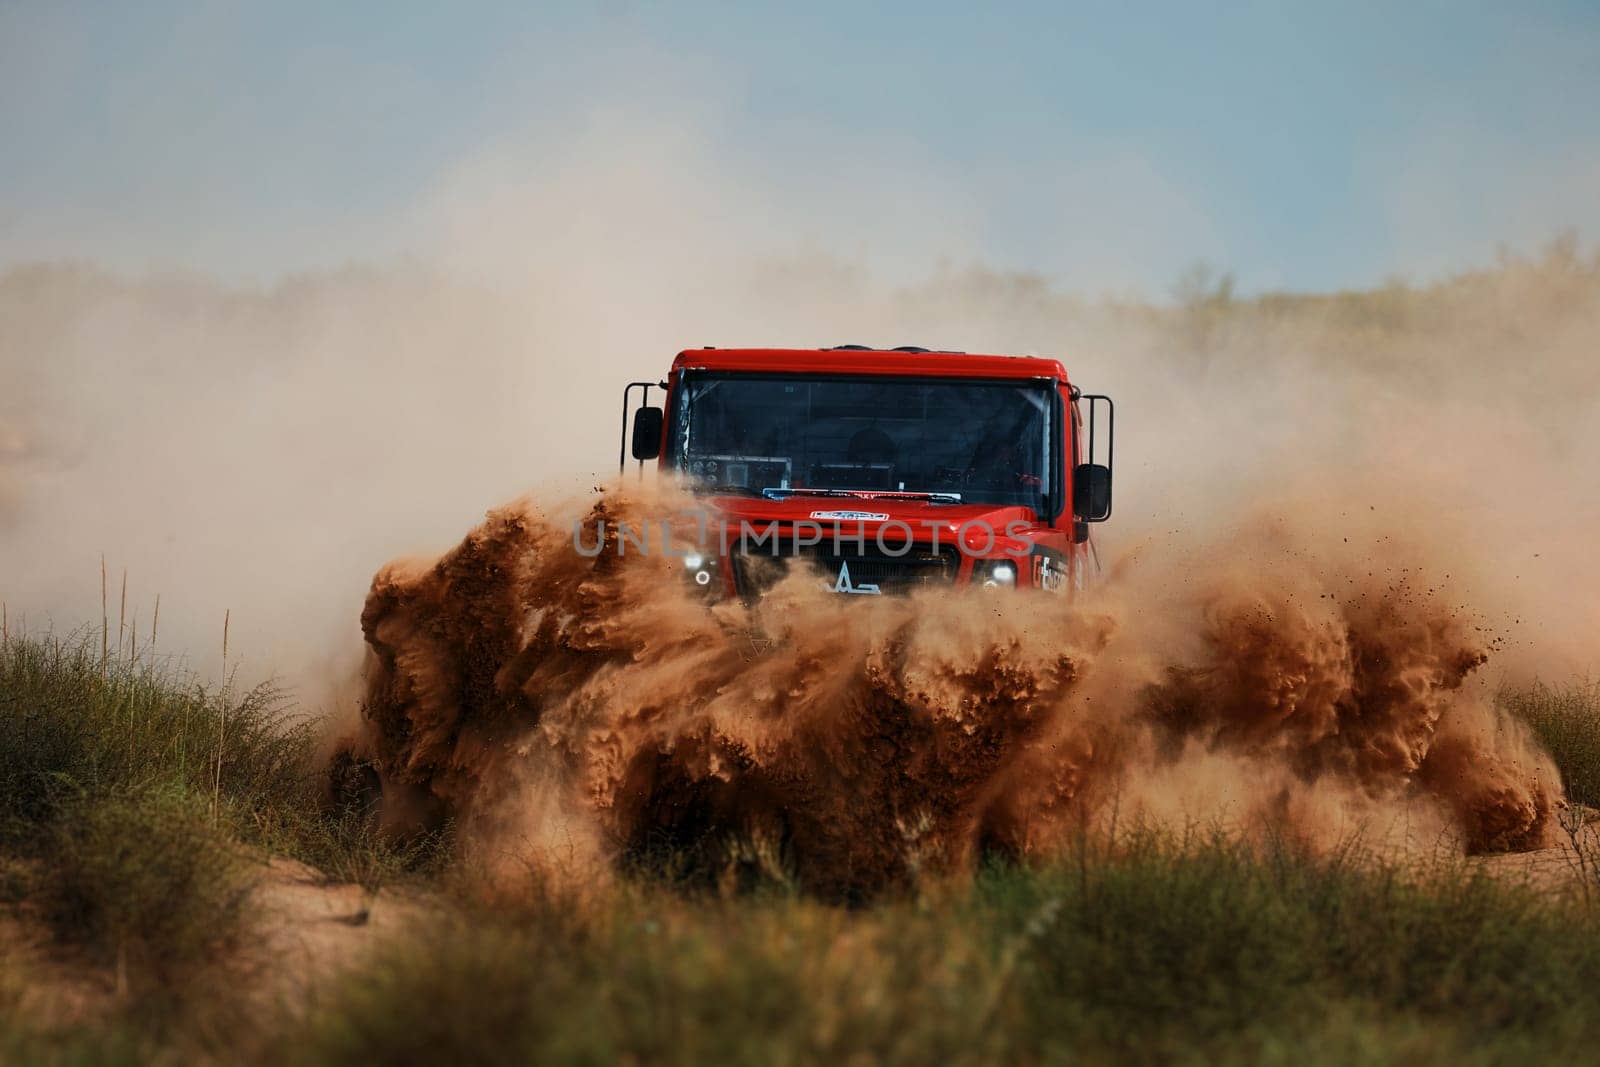 Extreme off-road racing. Sports truck MAZ Sport-auto team gets over the difficult part of the route during the Rally raid in sand. 14.07.2022 Kalmykia, Russia by EvgeniyQW